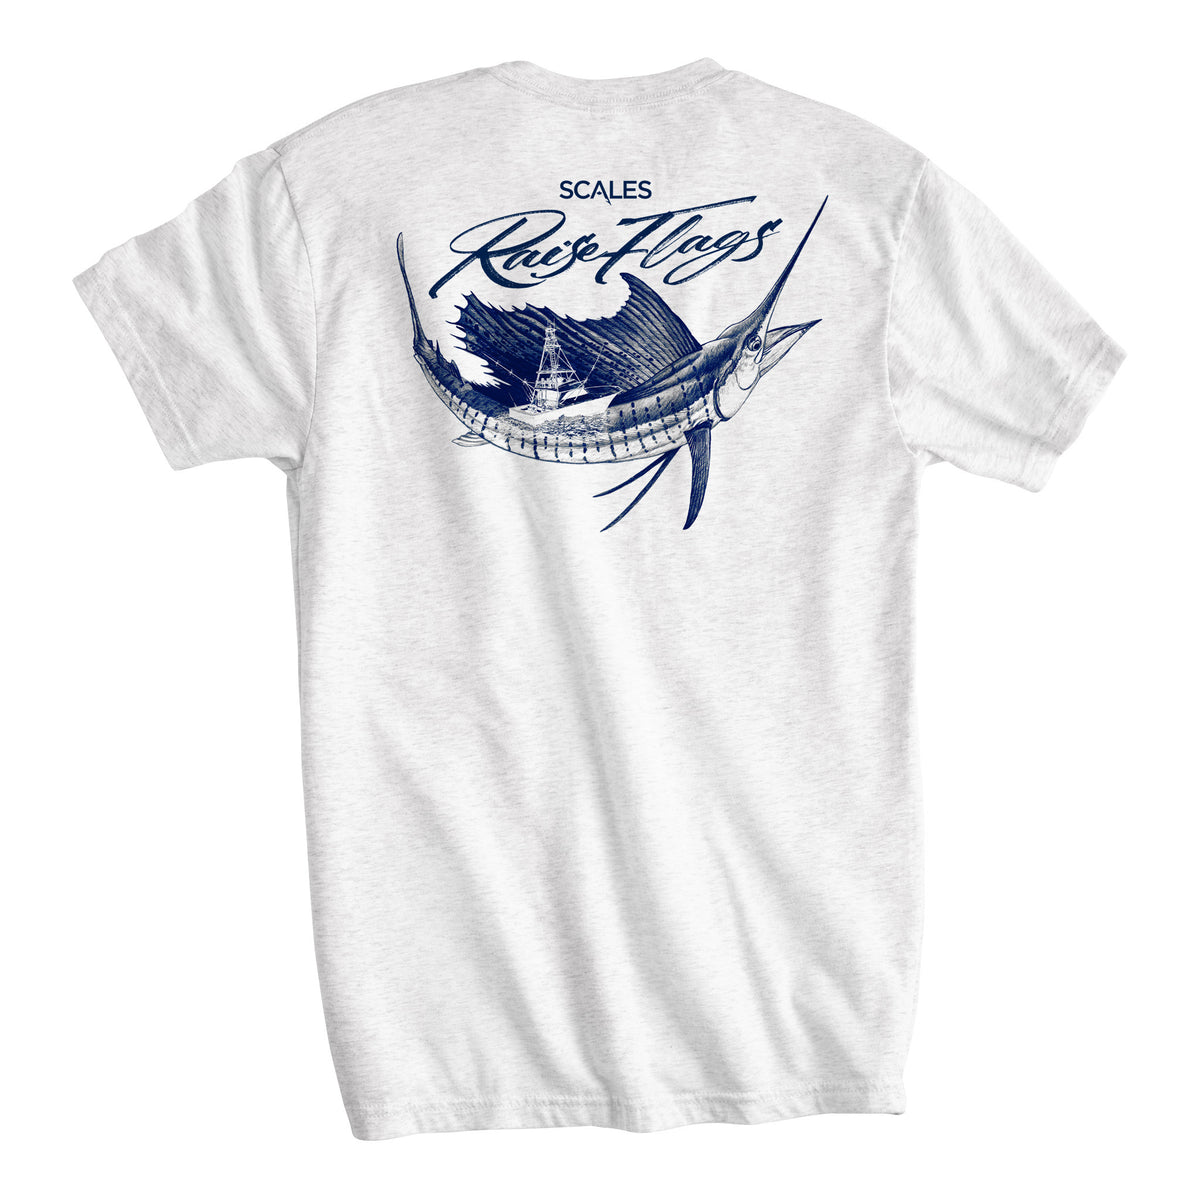 SCALES Popping Sails Premium Short Sleeve Tee